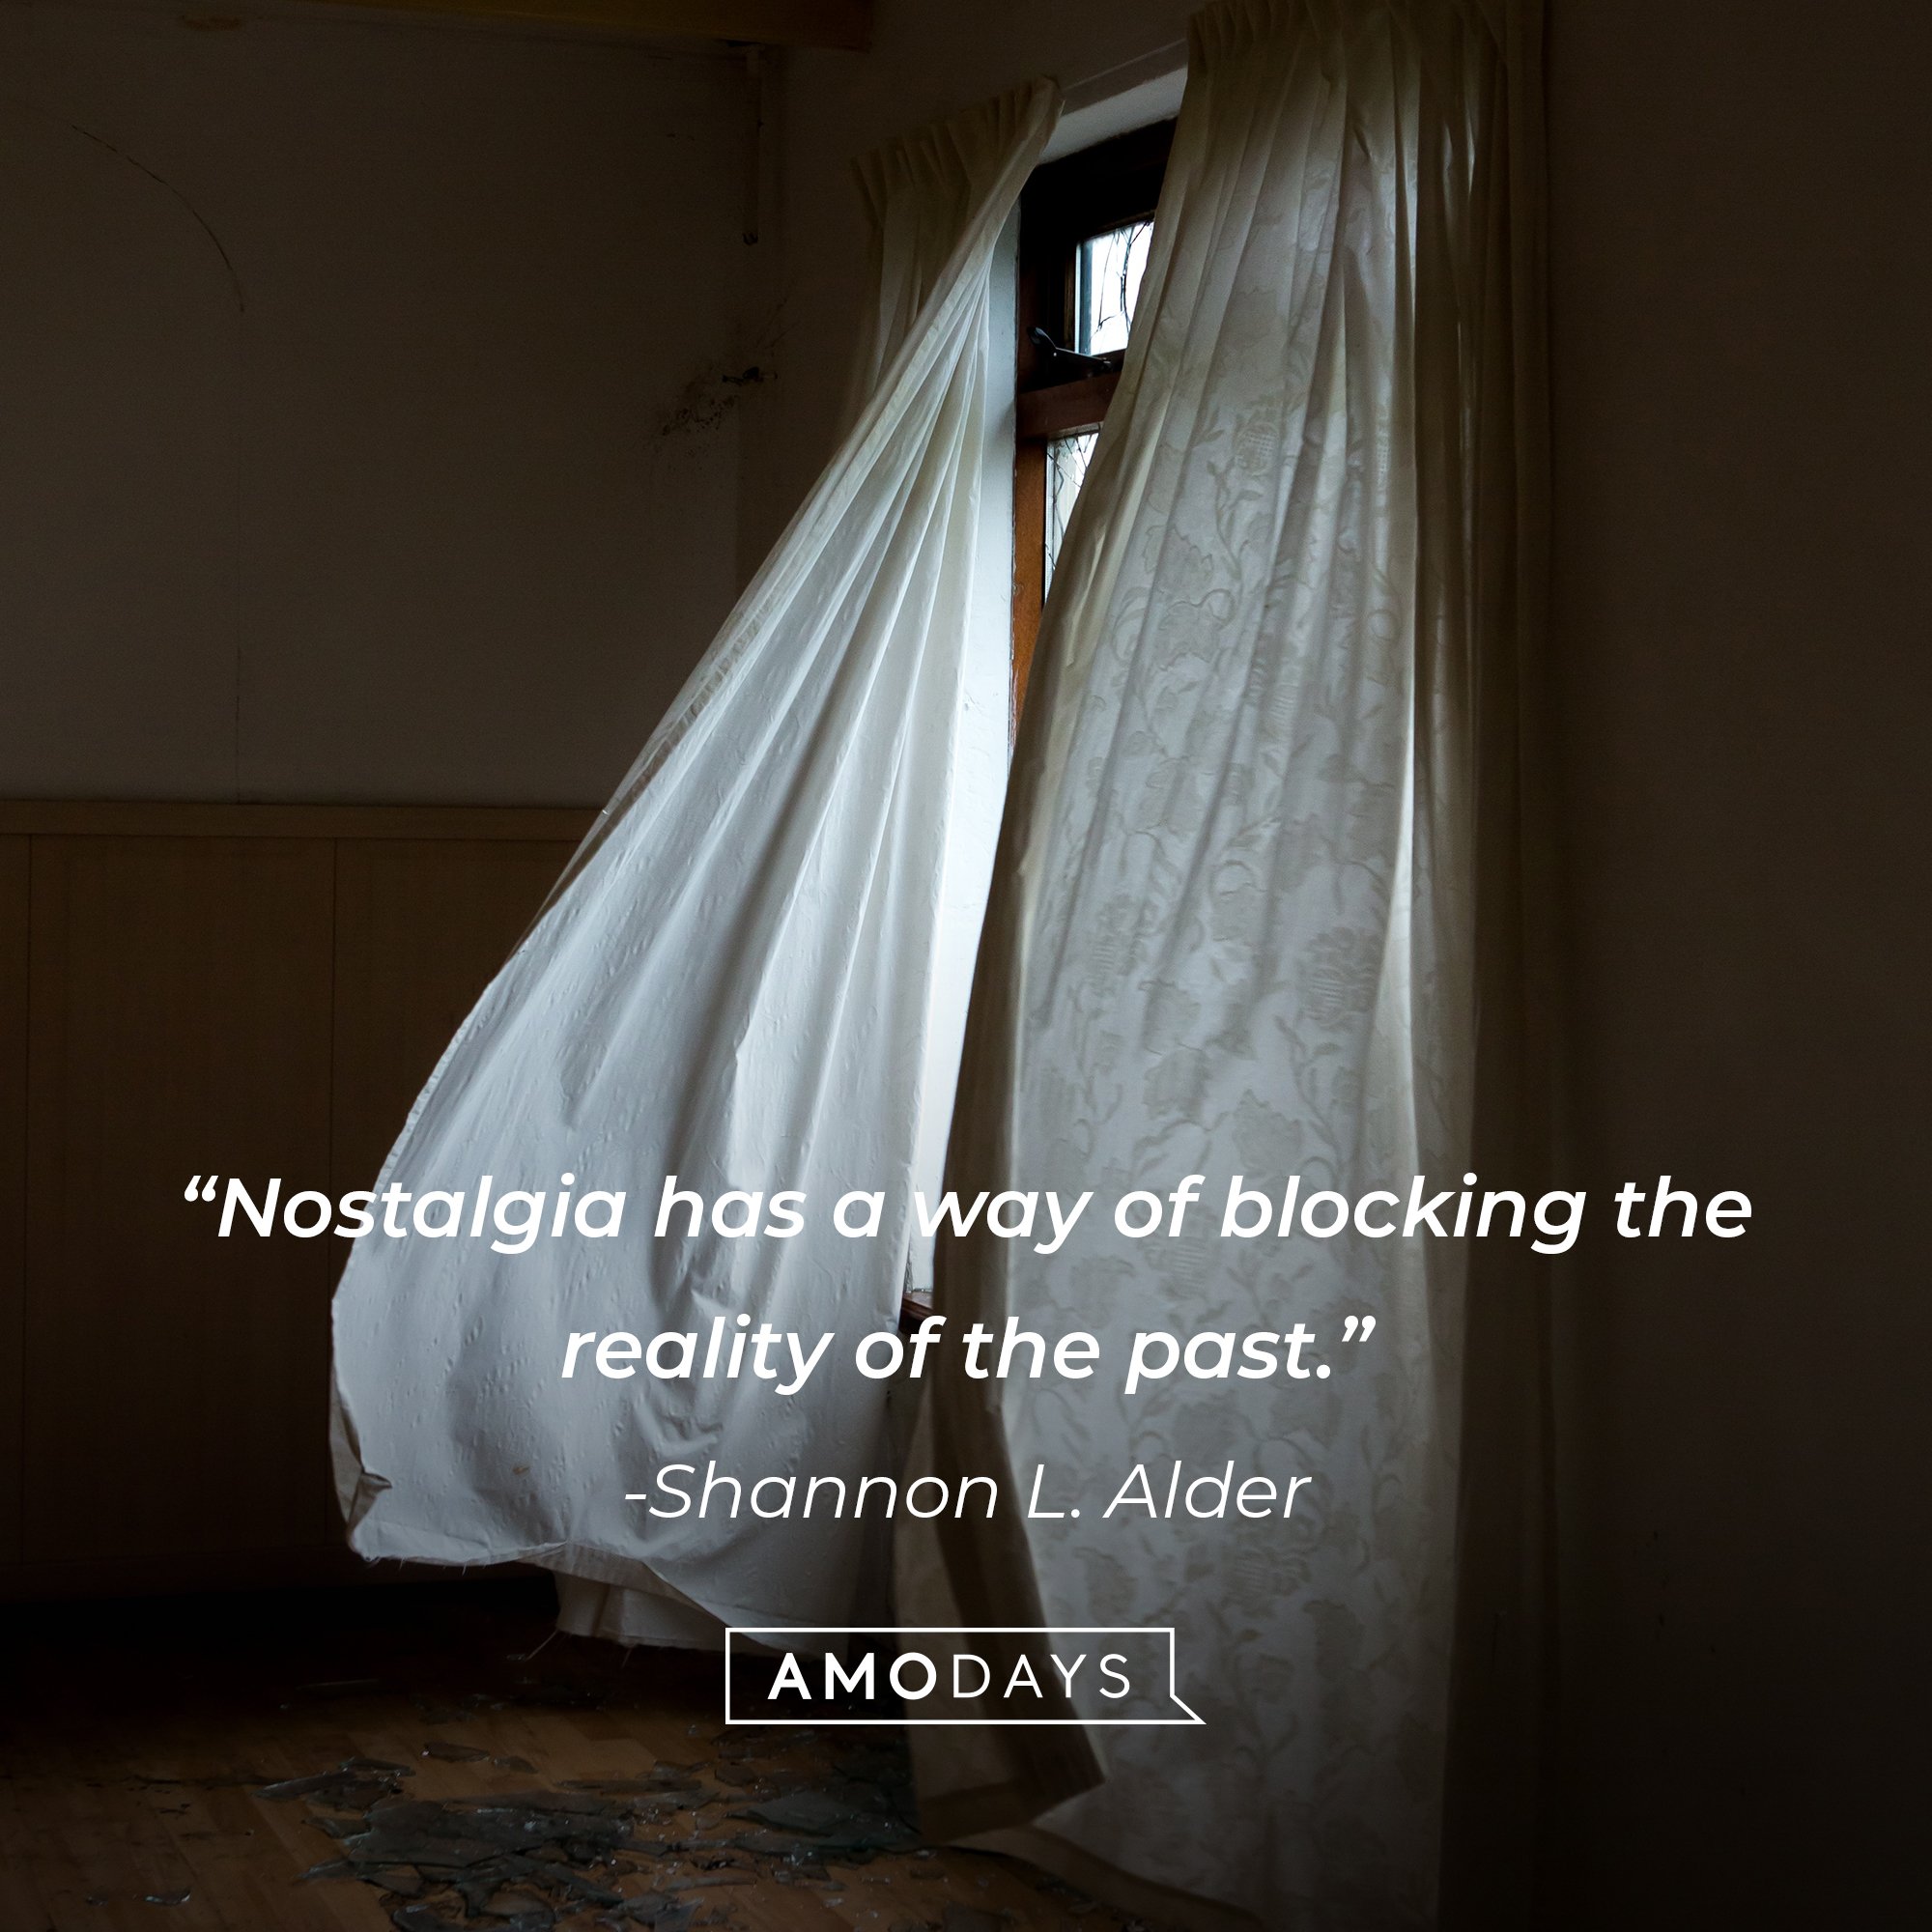 Shannon L. Alder's quote: “Nostalgia has a way of blocking the reality of the past.” | Image: AmoDays